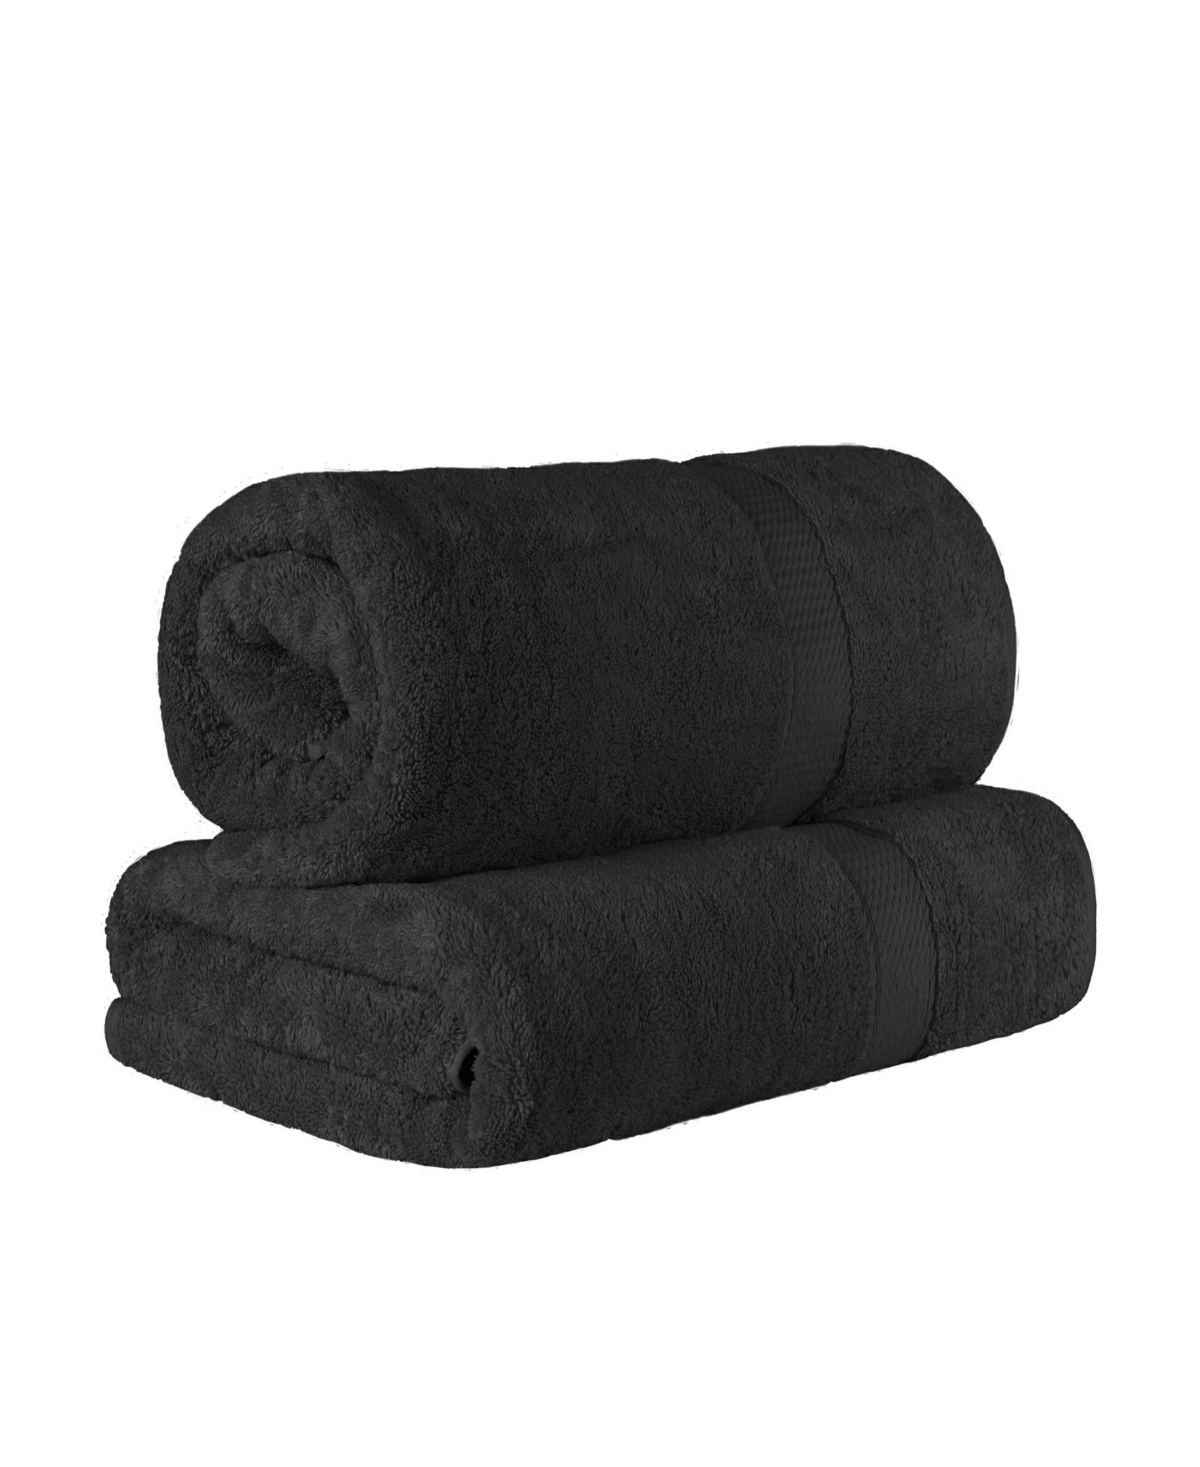 Superior Highly Absorbent 2 Piece Egyptian Cotton Ultra Plush Solid Bath Sheet Set Bedding In Black